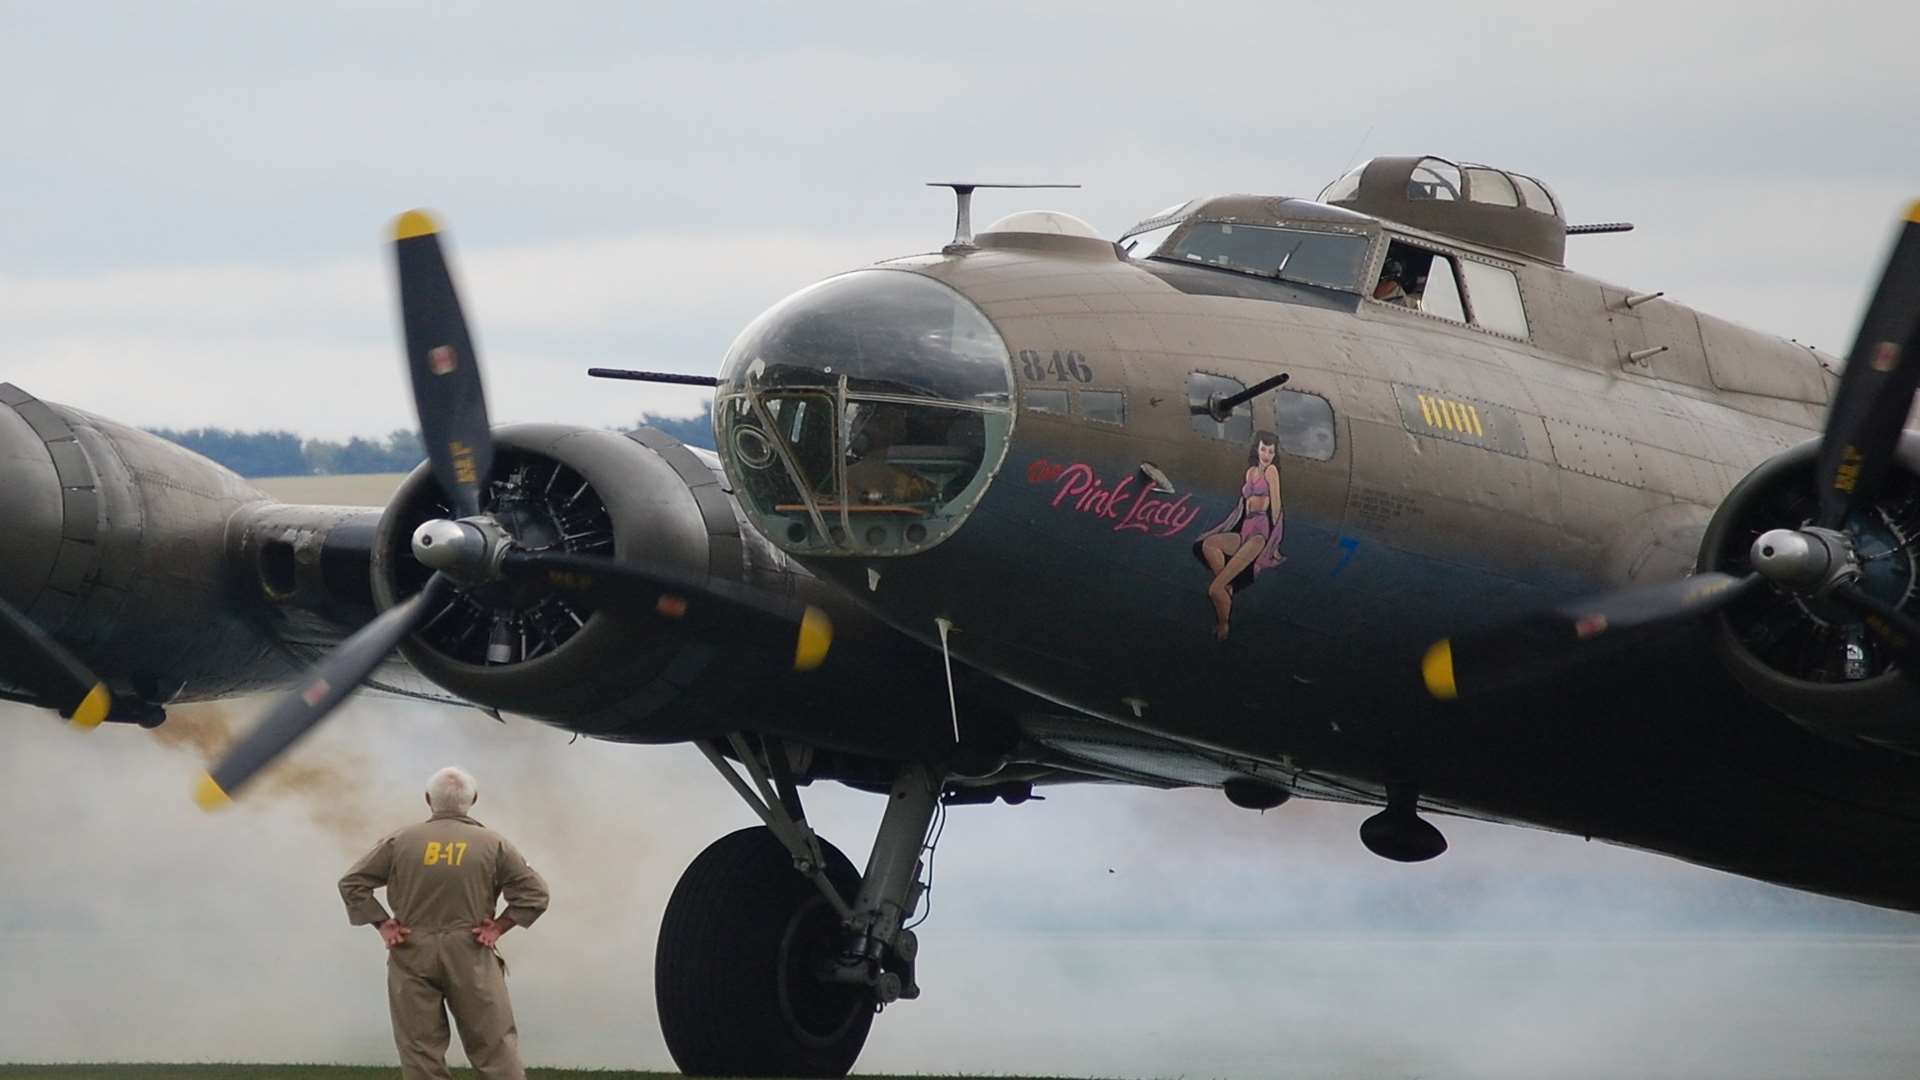 The Pink Lady Boeing B17 Flying Fortress